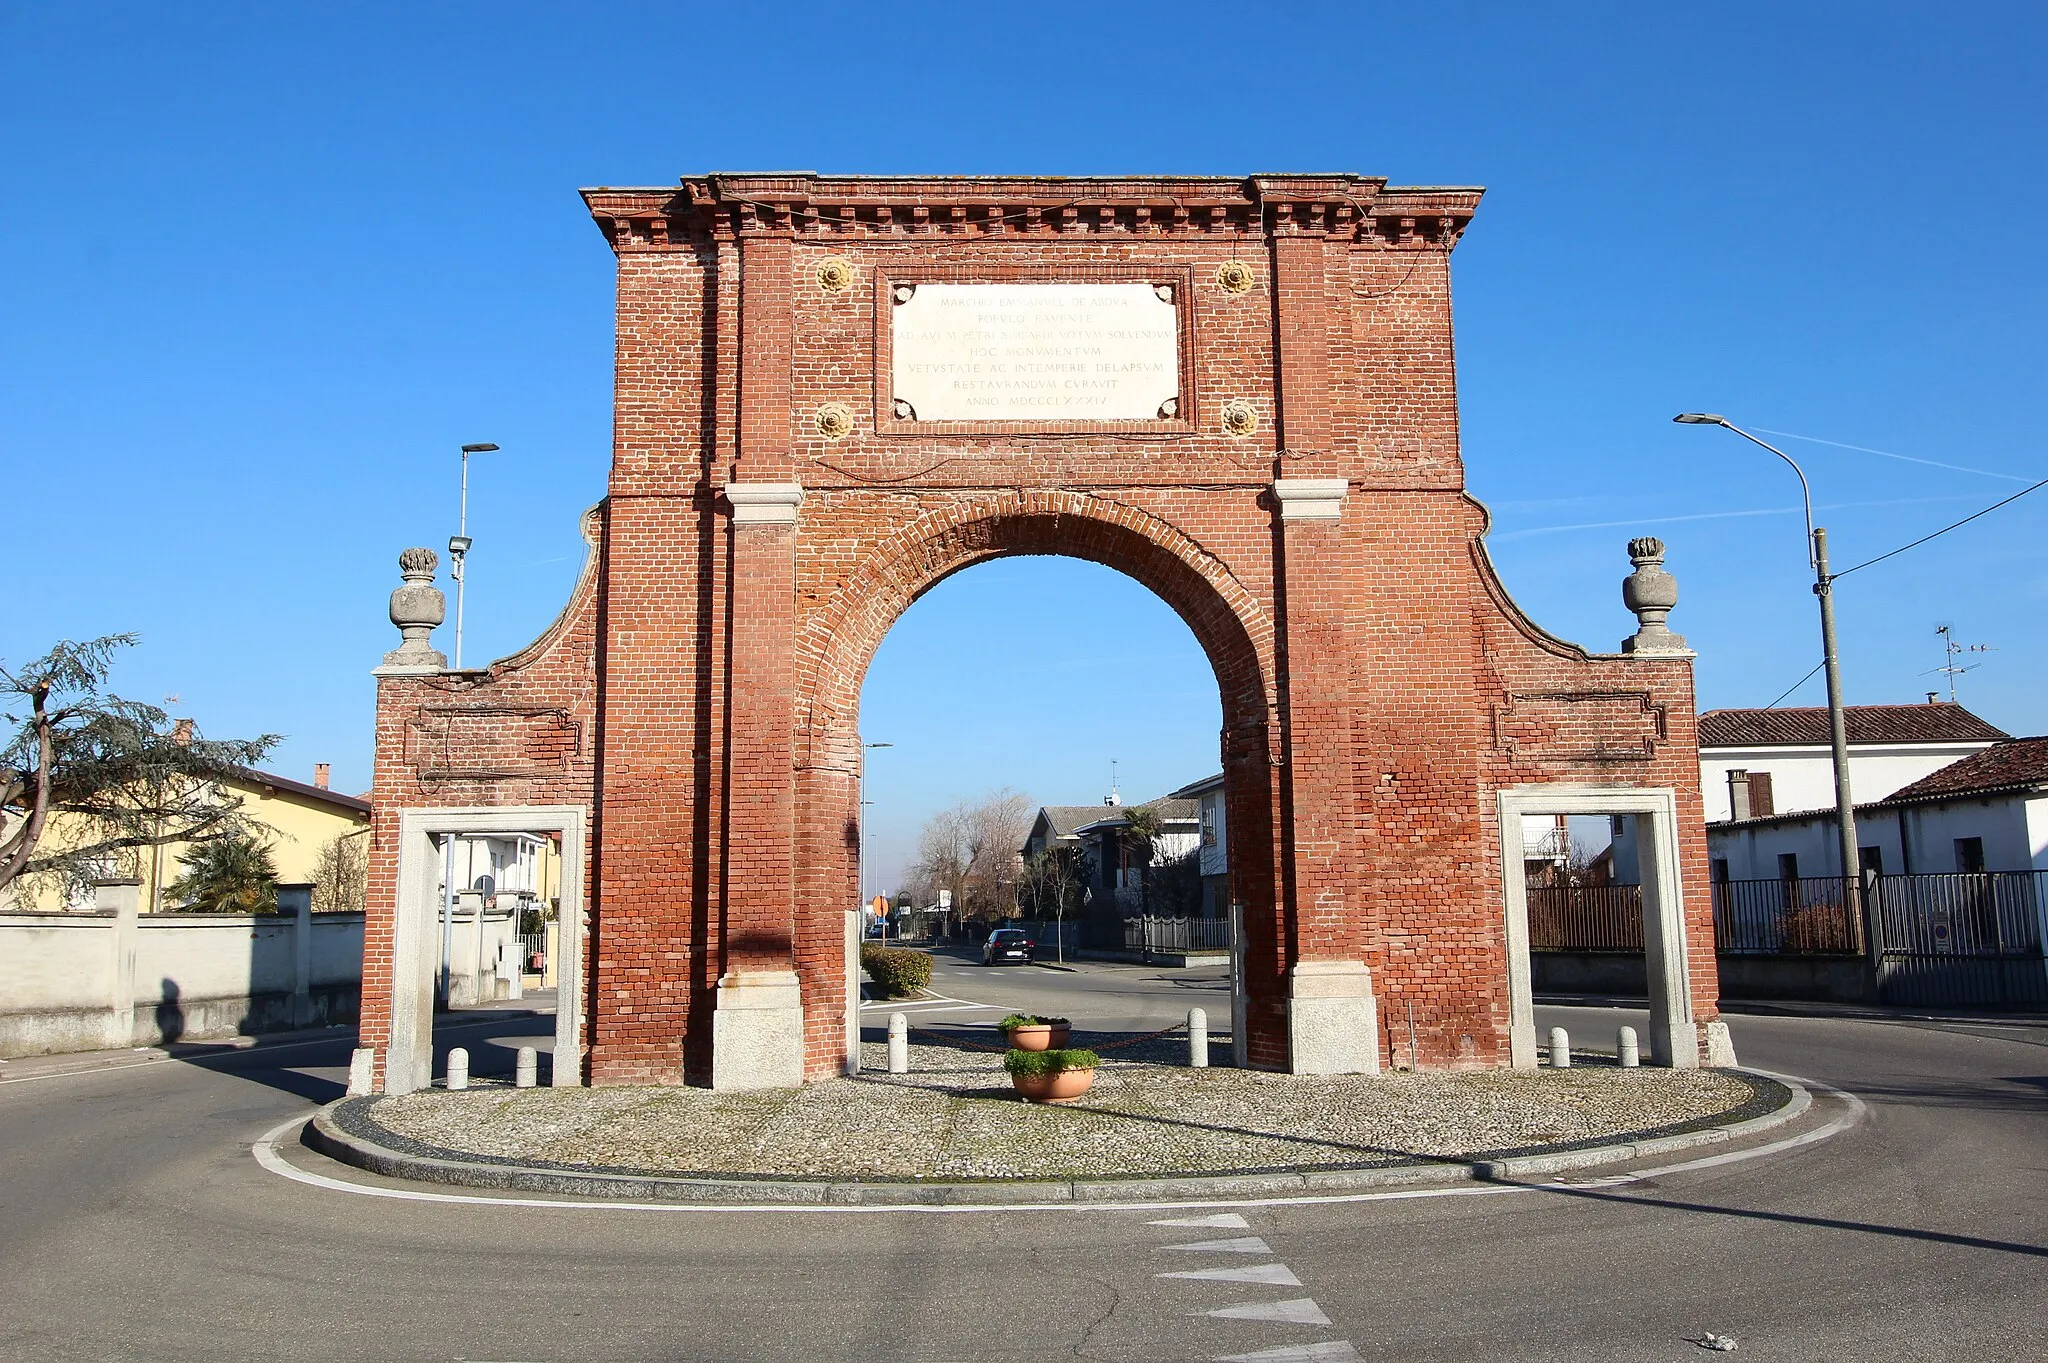 Photo showing: Triumphal arch Arco Trionfale, Pieve del Cairo, Province of Pavia, Lombardy, Italy